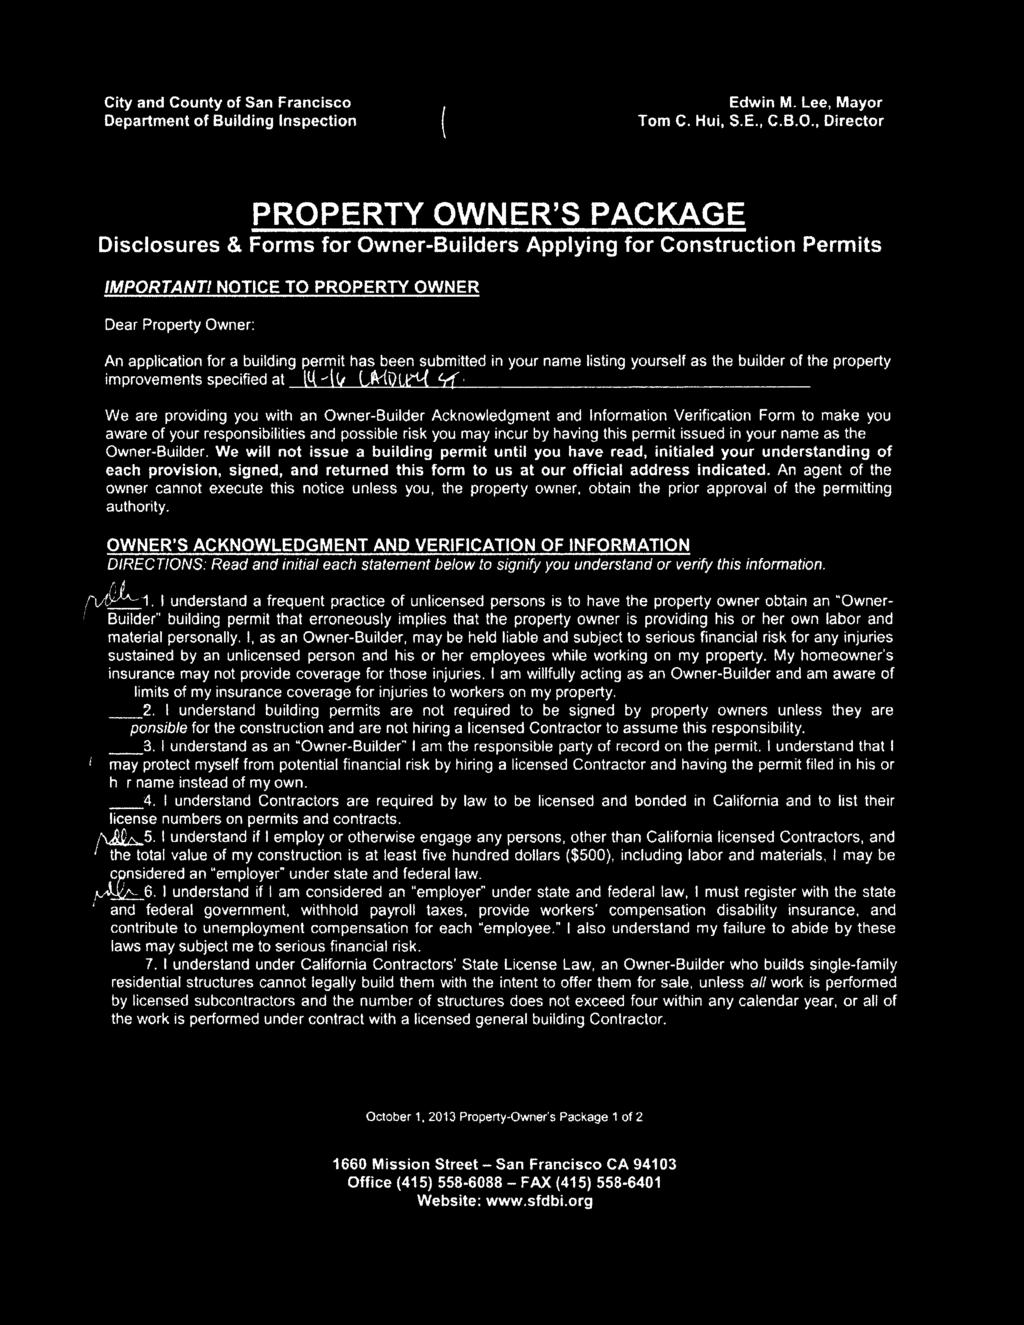 NOTICE TO PROPERTY OWNER Dear Property Owner: An application for a building permit has been submitted in your name listing yourself as the builder of the property improvements specified at (~(~~(~